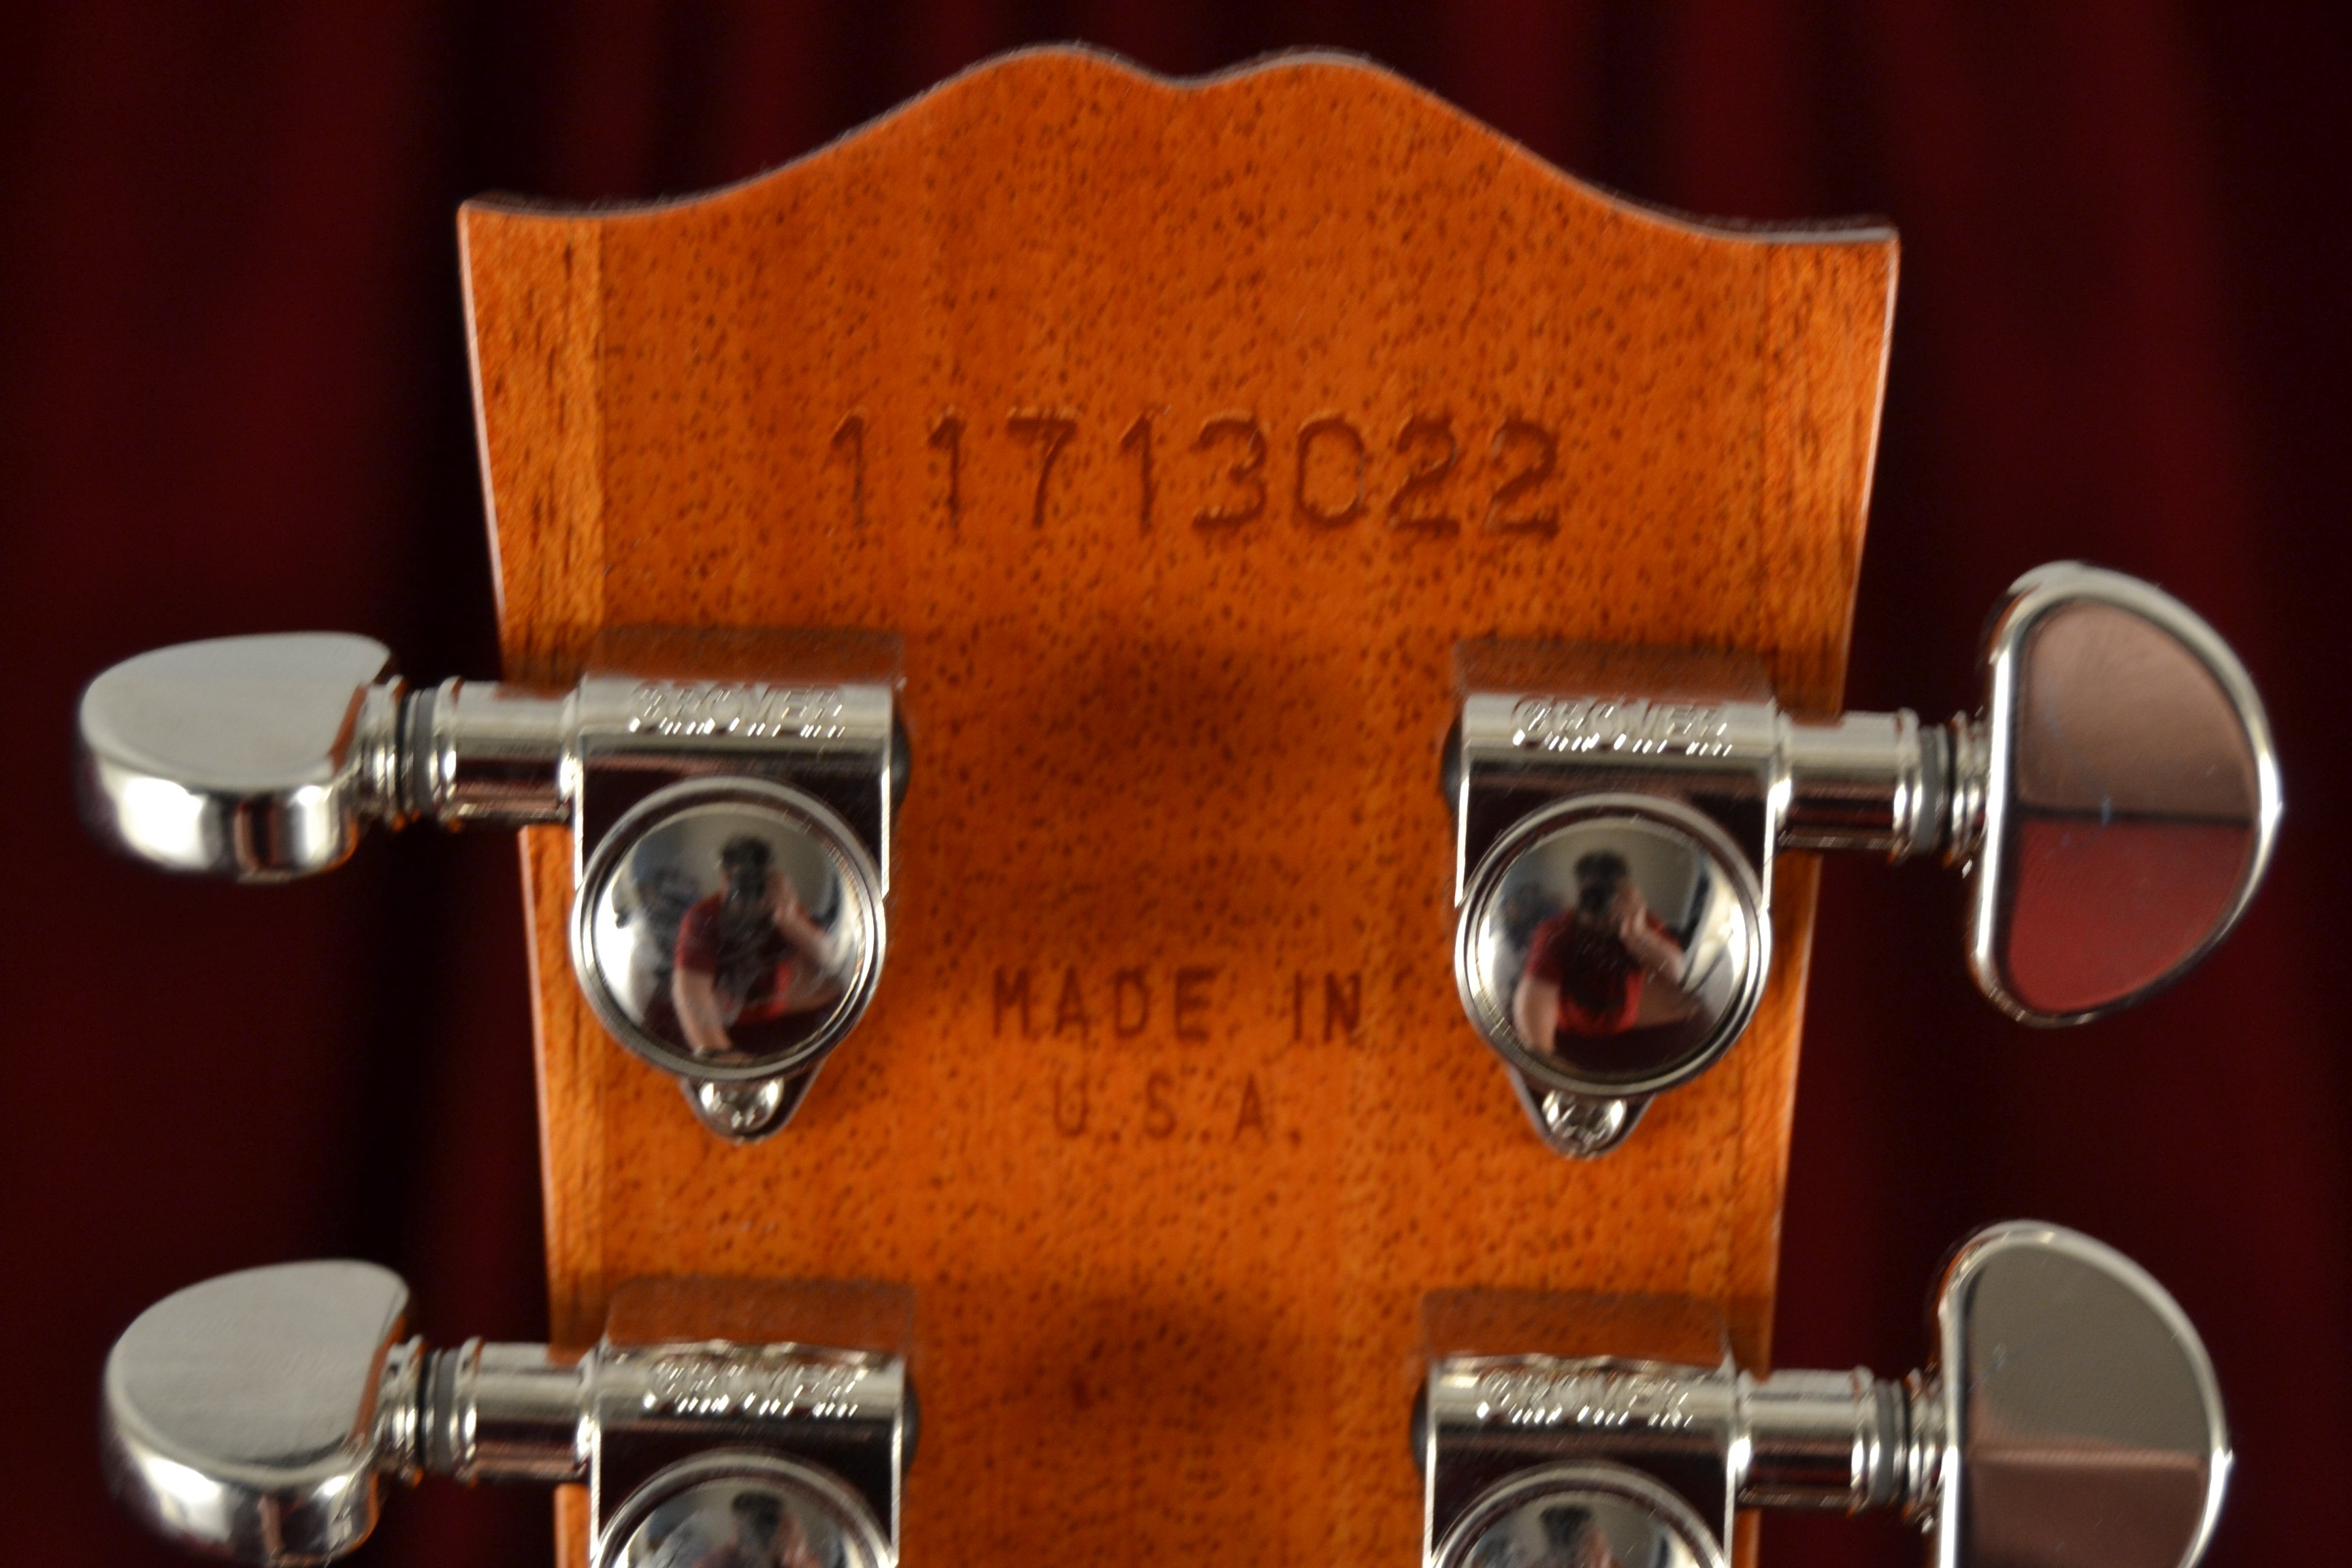 Serial number dating gibson guitar 